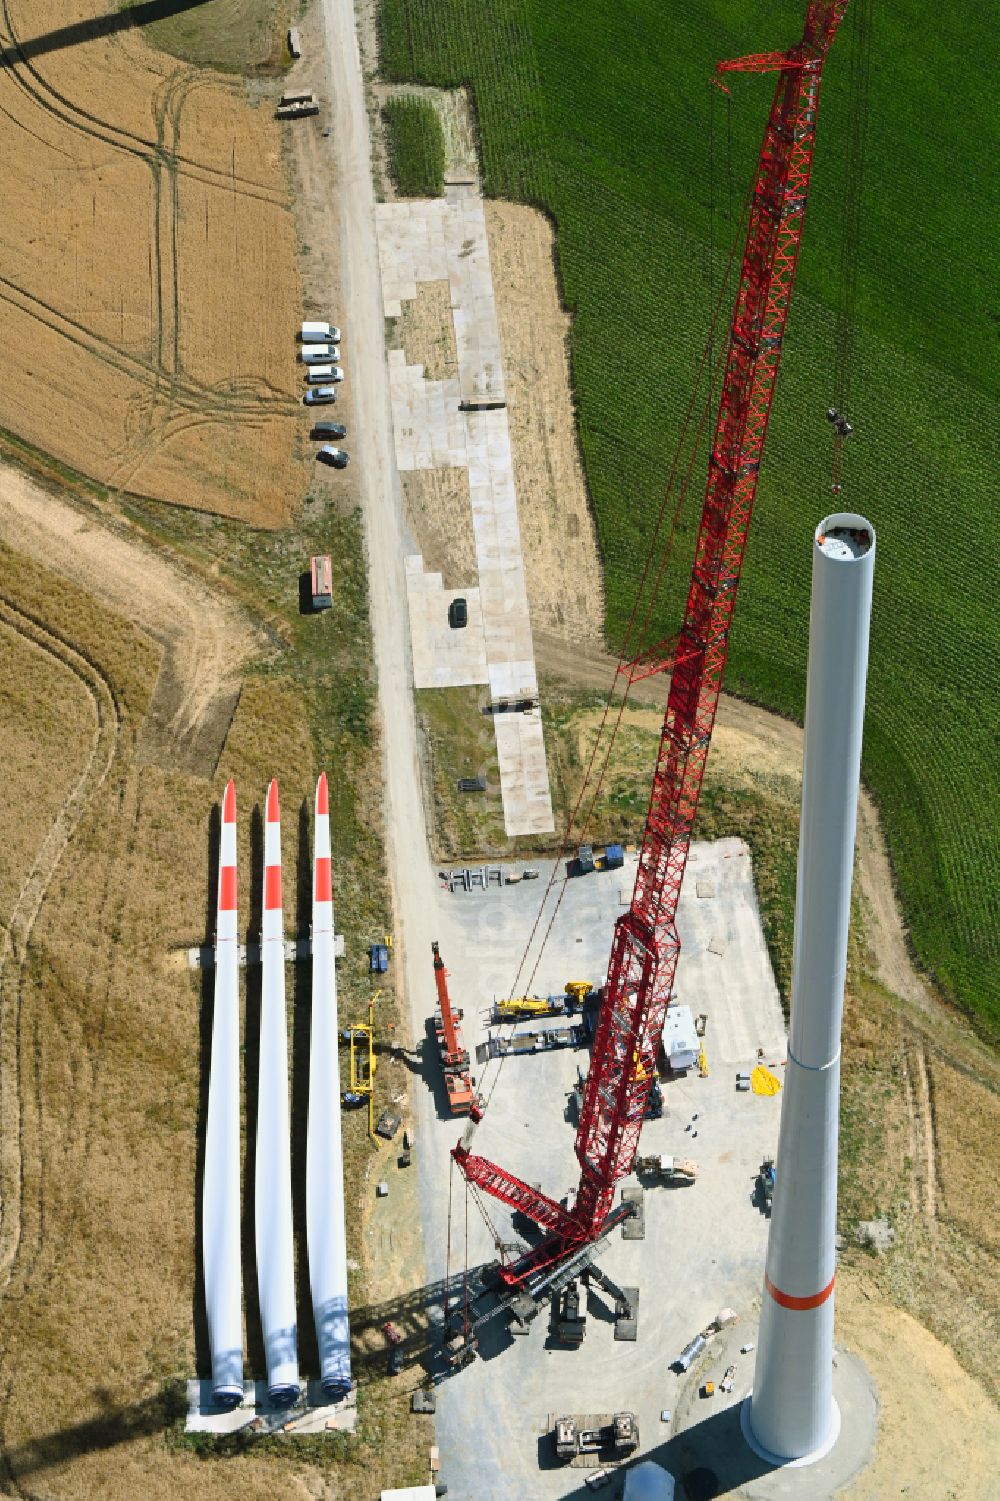 Kirchheilingen from the bird's eye view: Fisheye perspective construction site for wind turbine installation in Kirchheilingen in the state Thuringia, Germany